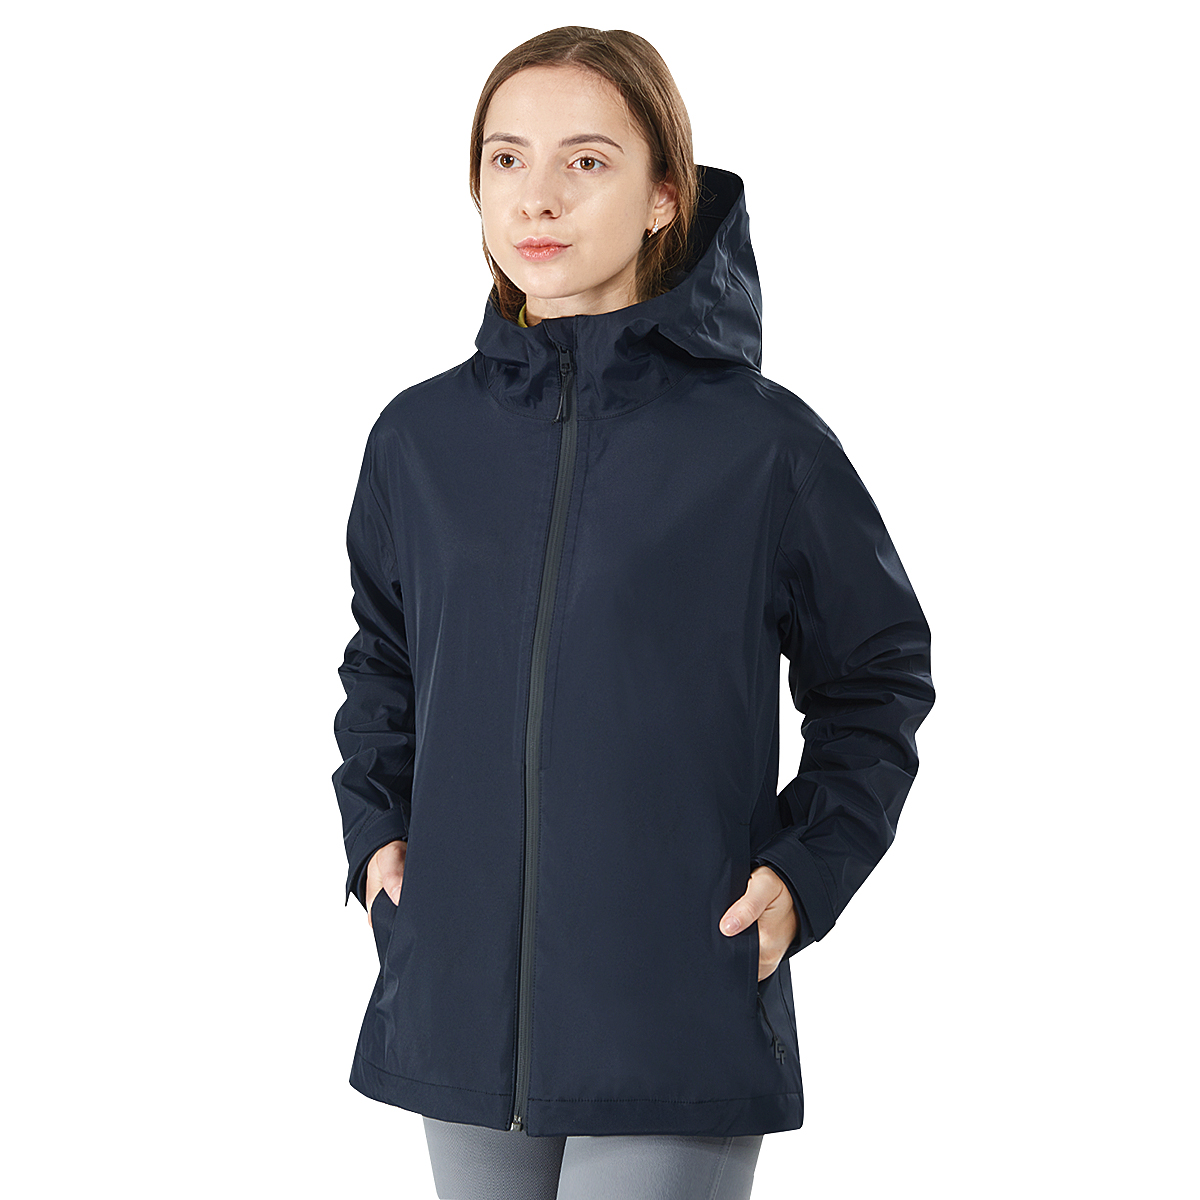 Gymax Women' Waterproof Jacket Hooded Coat w/Cuff Camping Navy Size L - image 4 of 10